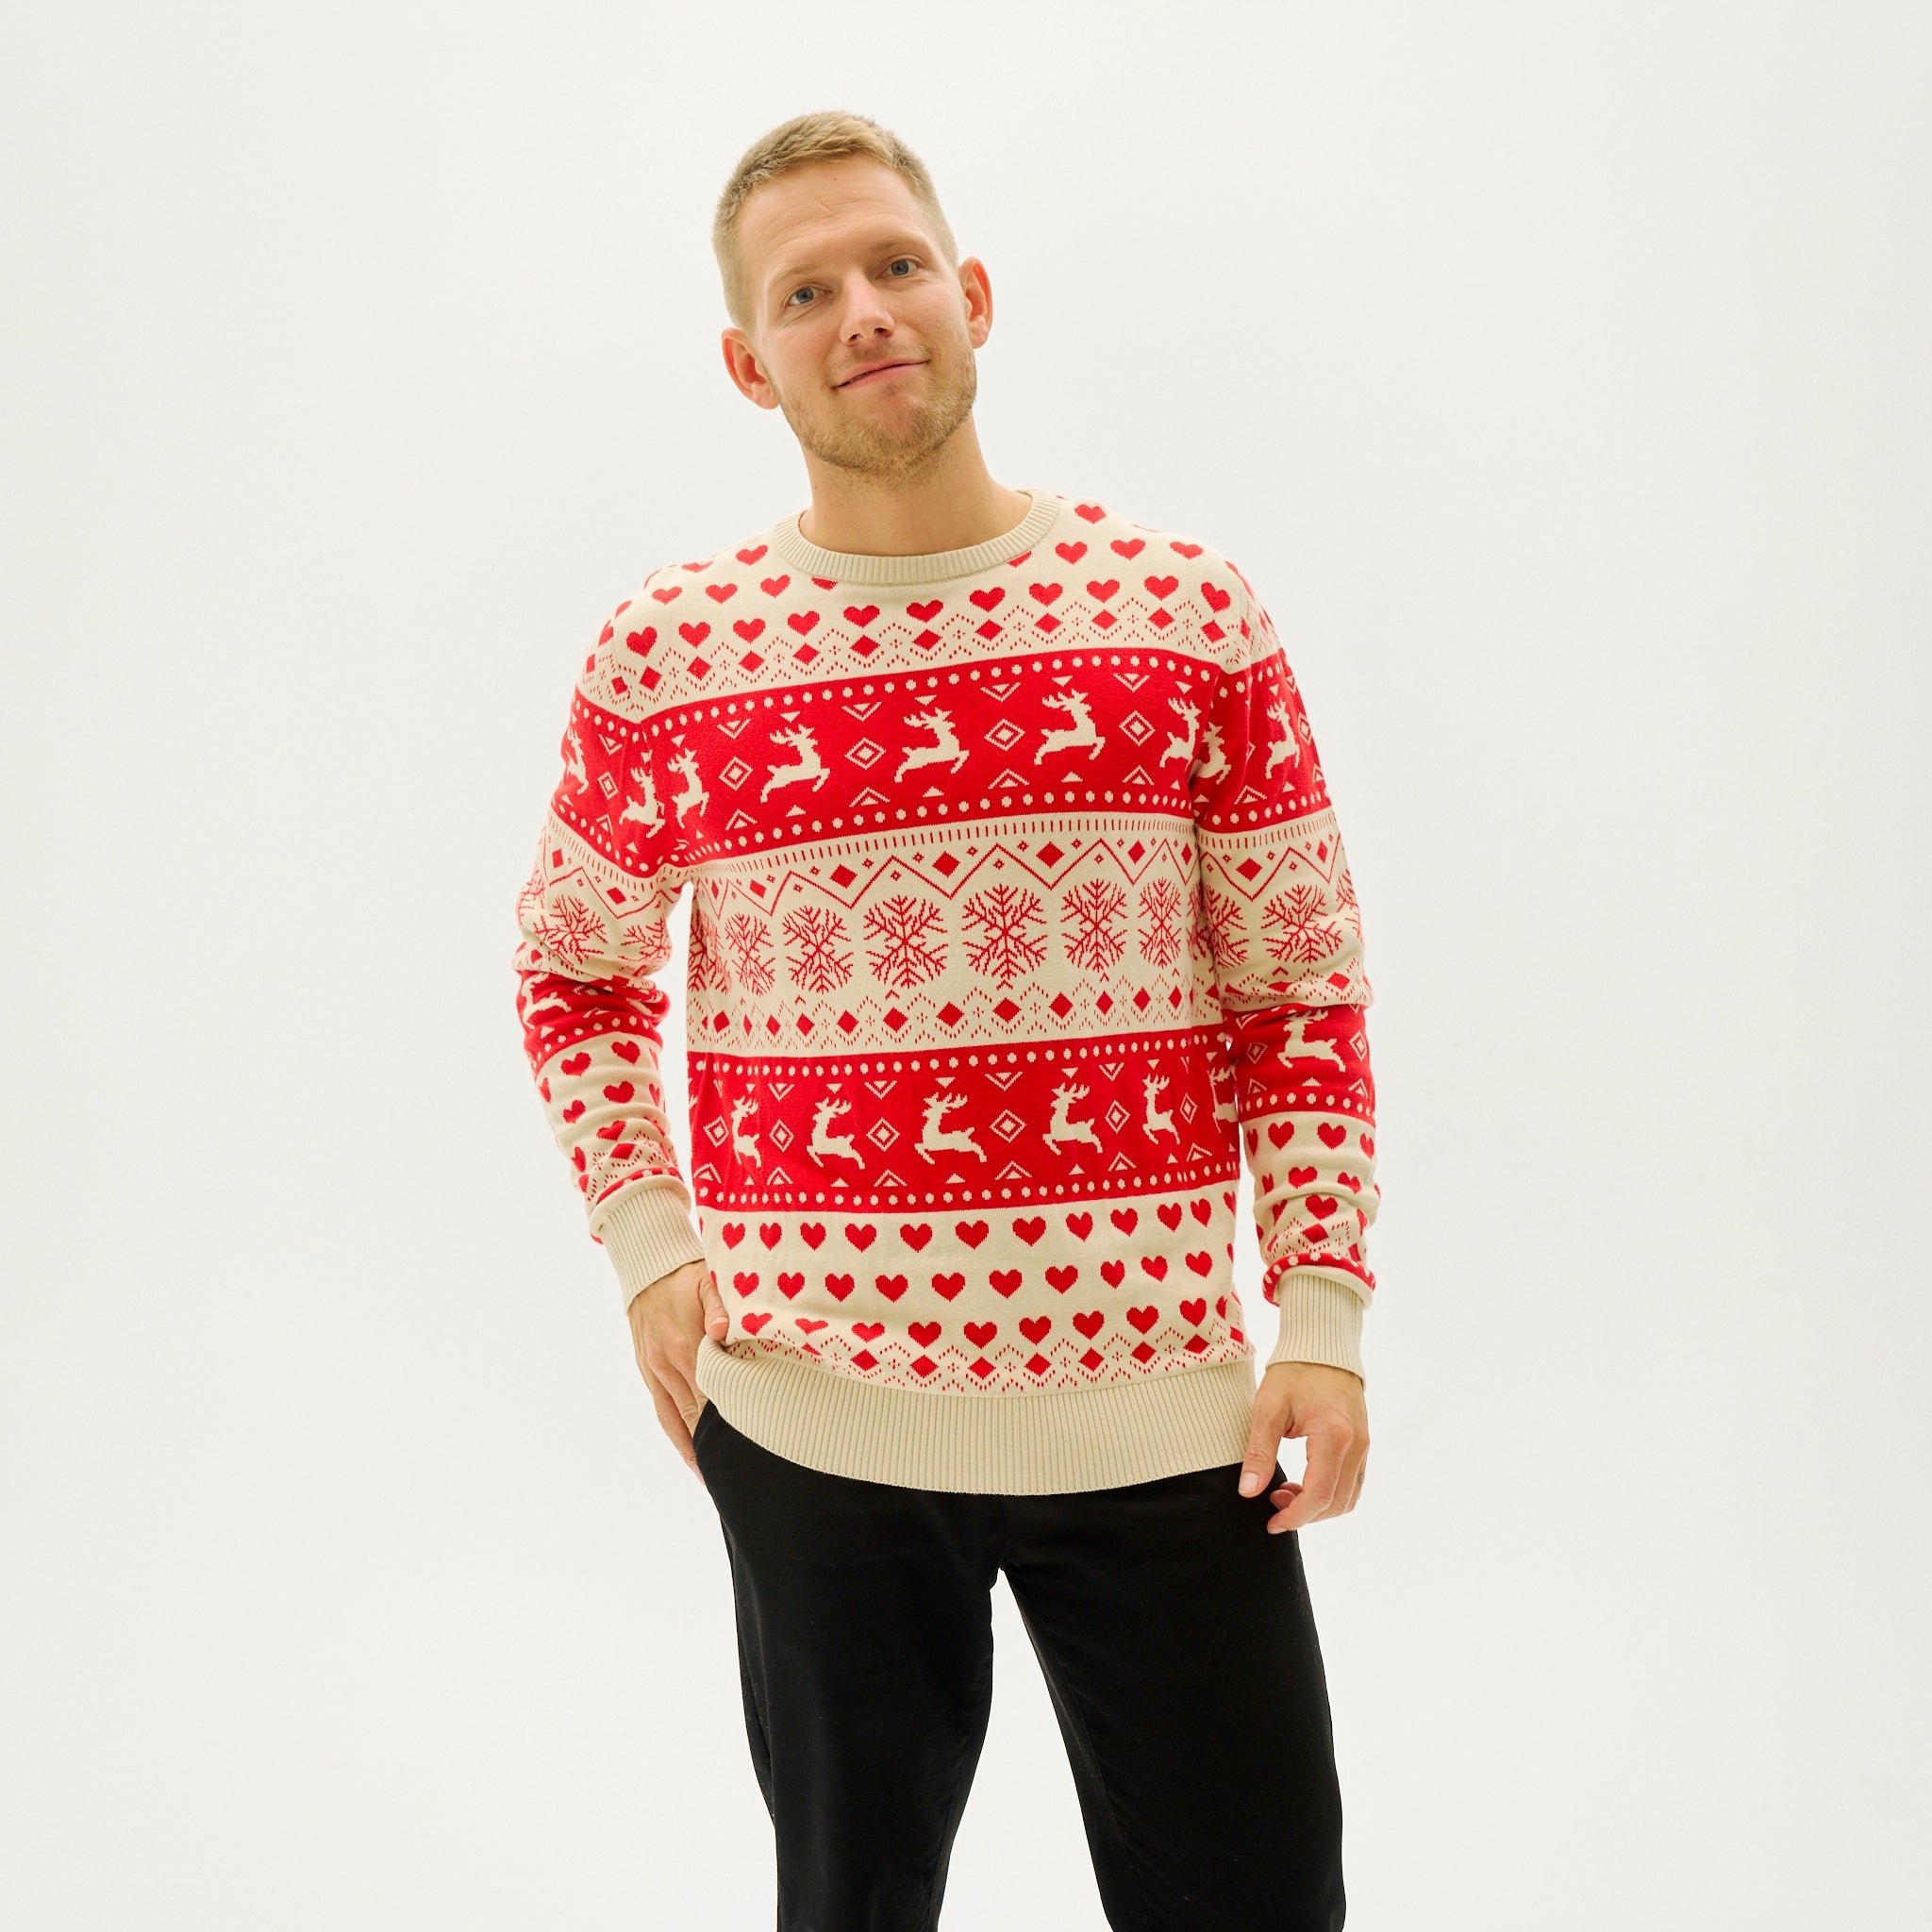 The Beloved Christmas Sweater - Herre.